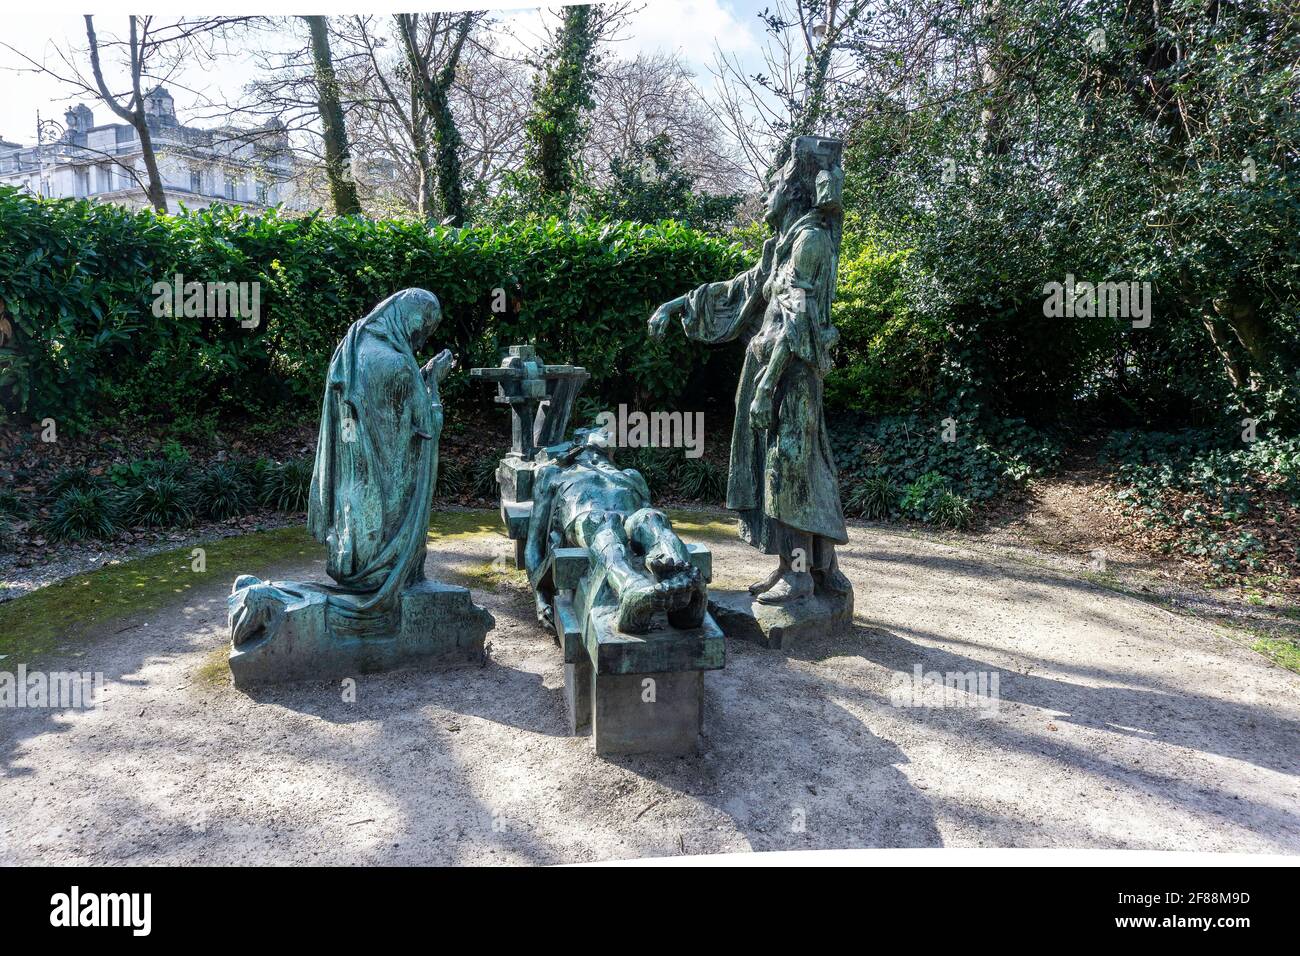 The Victims. A sculpture representing victims of war by Andrew O’Connor in Merrion Square Park, Dublin. The victim is mourned by his wife and mother. Stock Photo